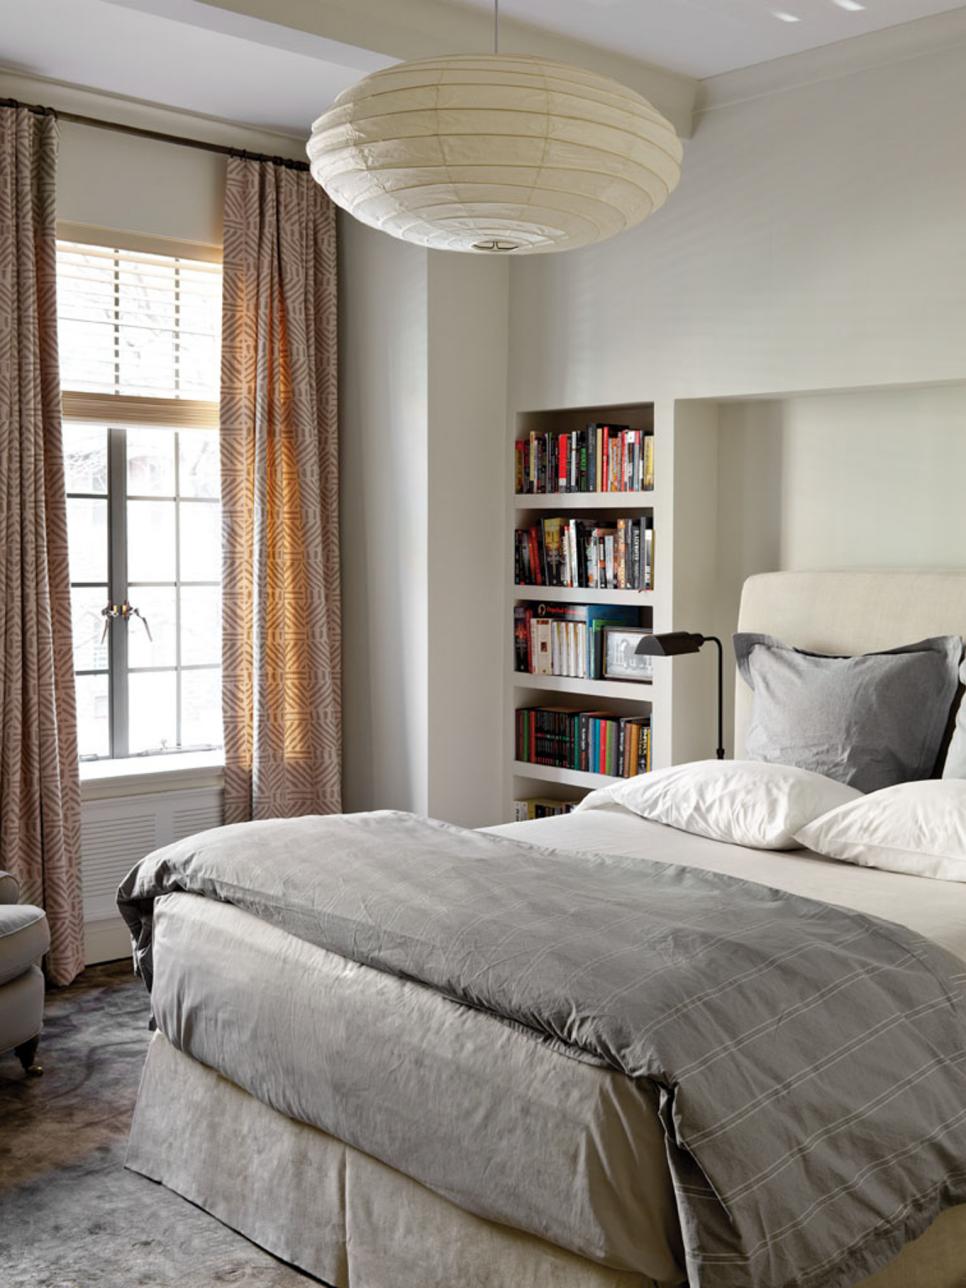 Contemporary bedroom with built-in bookshelf and paper lantern globe pendant light